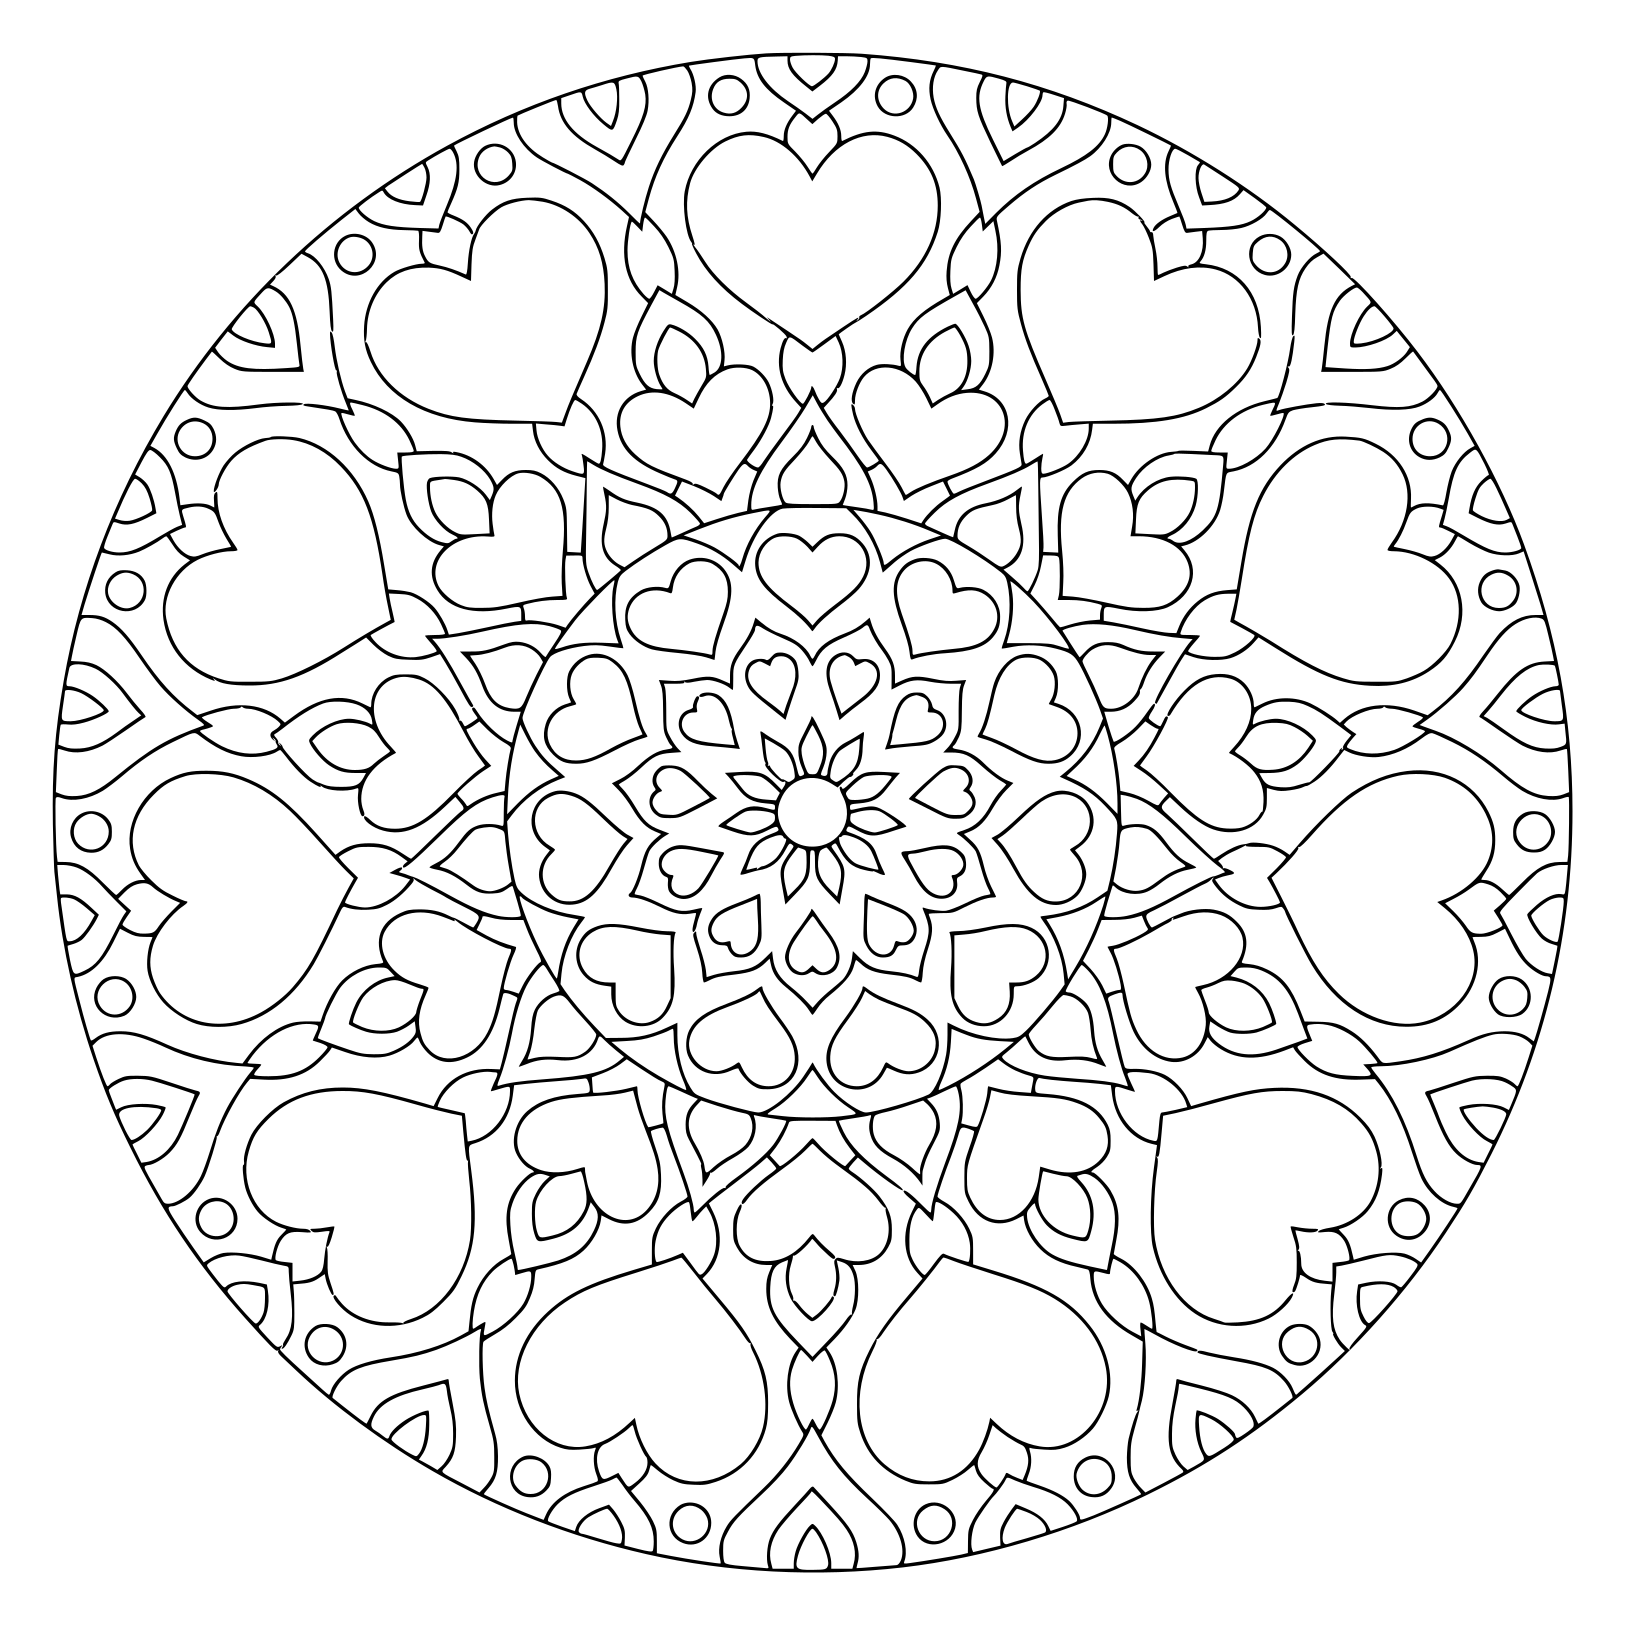 Flower Mandala With Hearts For Valentine S Day Coloring Page